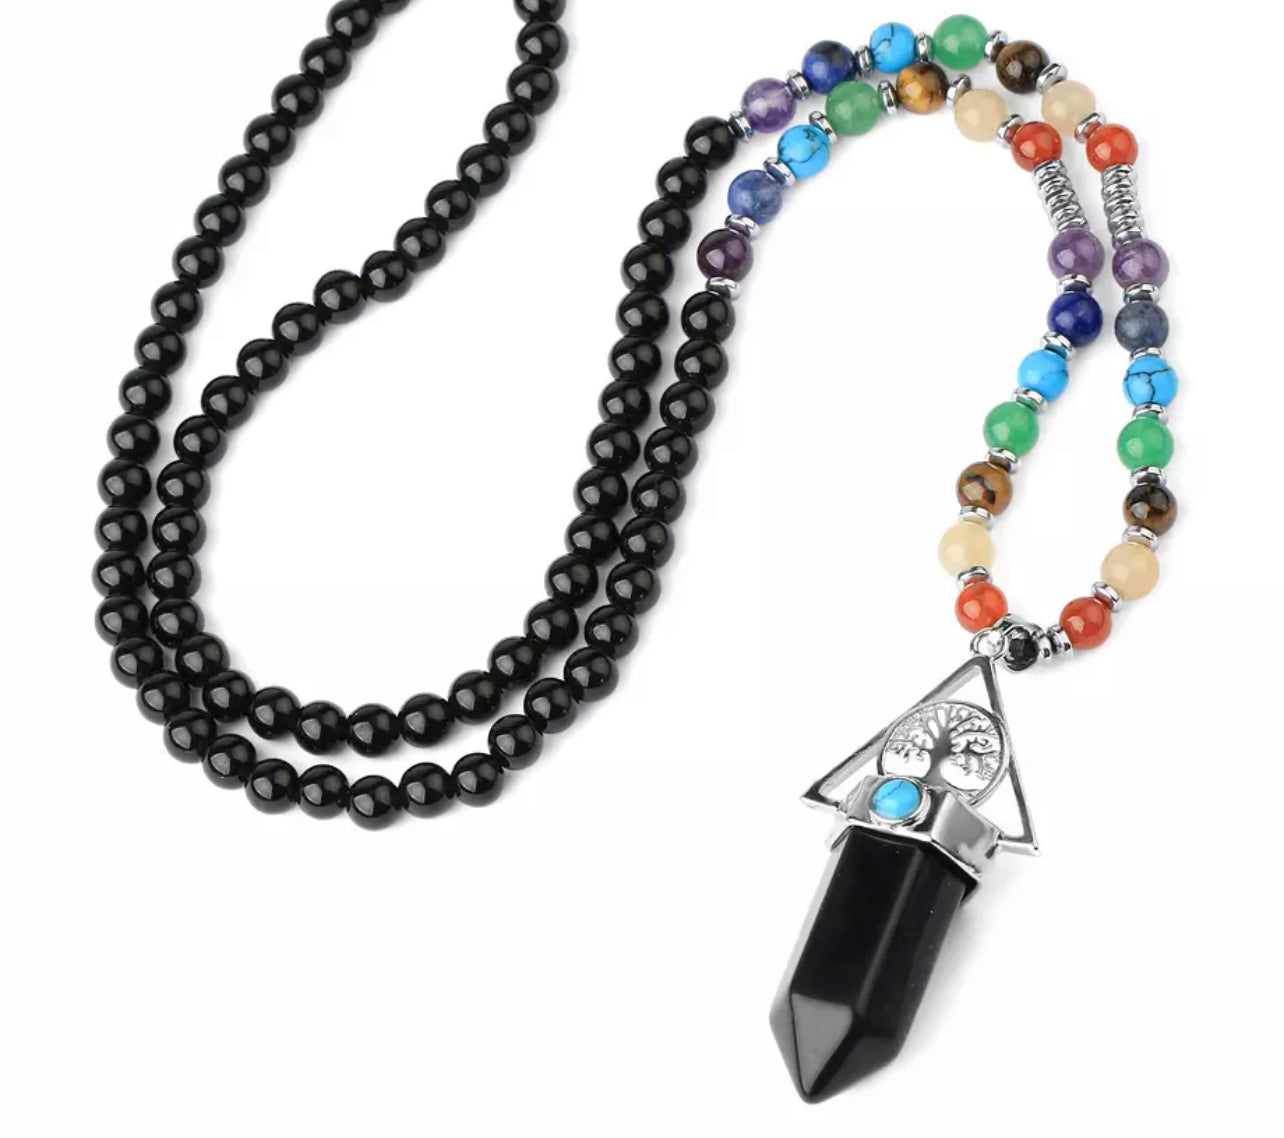 OBSIDIAN OR AMATISTA CHAKRA PROTECTION NECKLACE